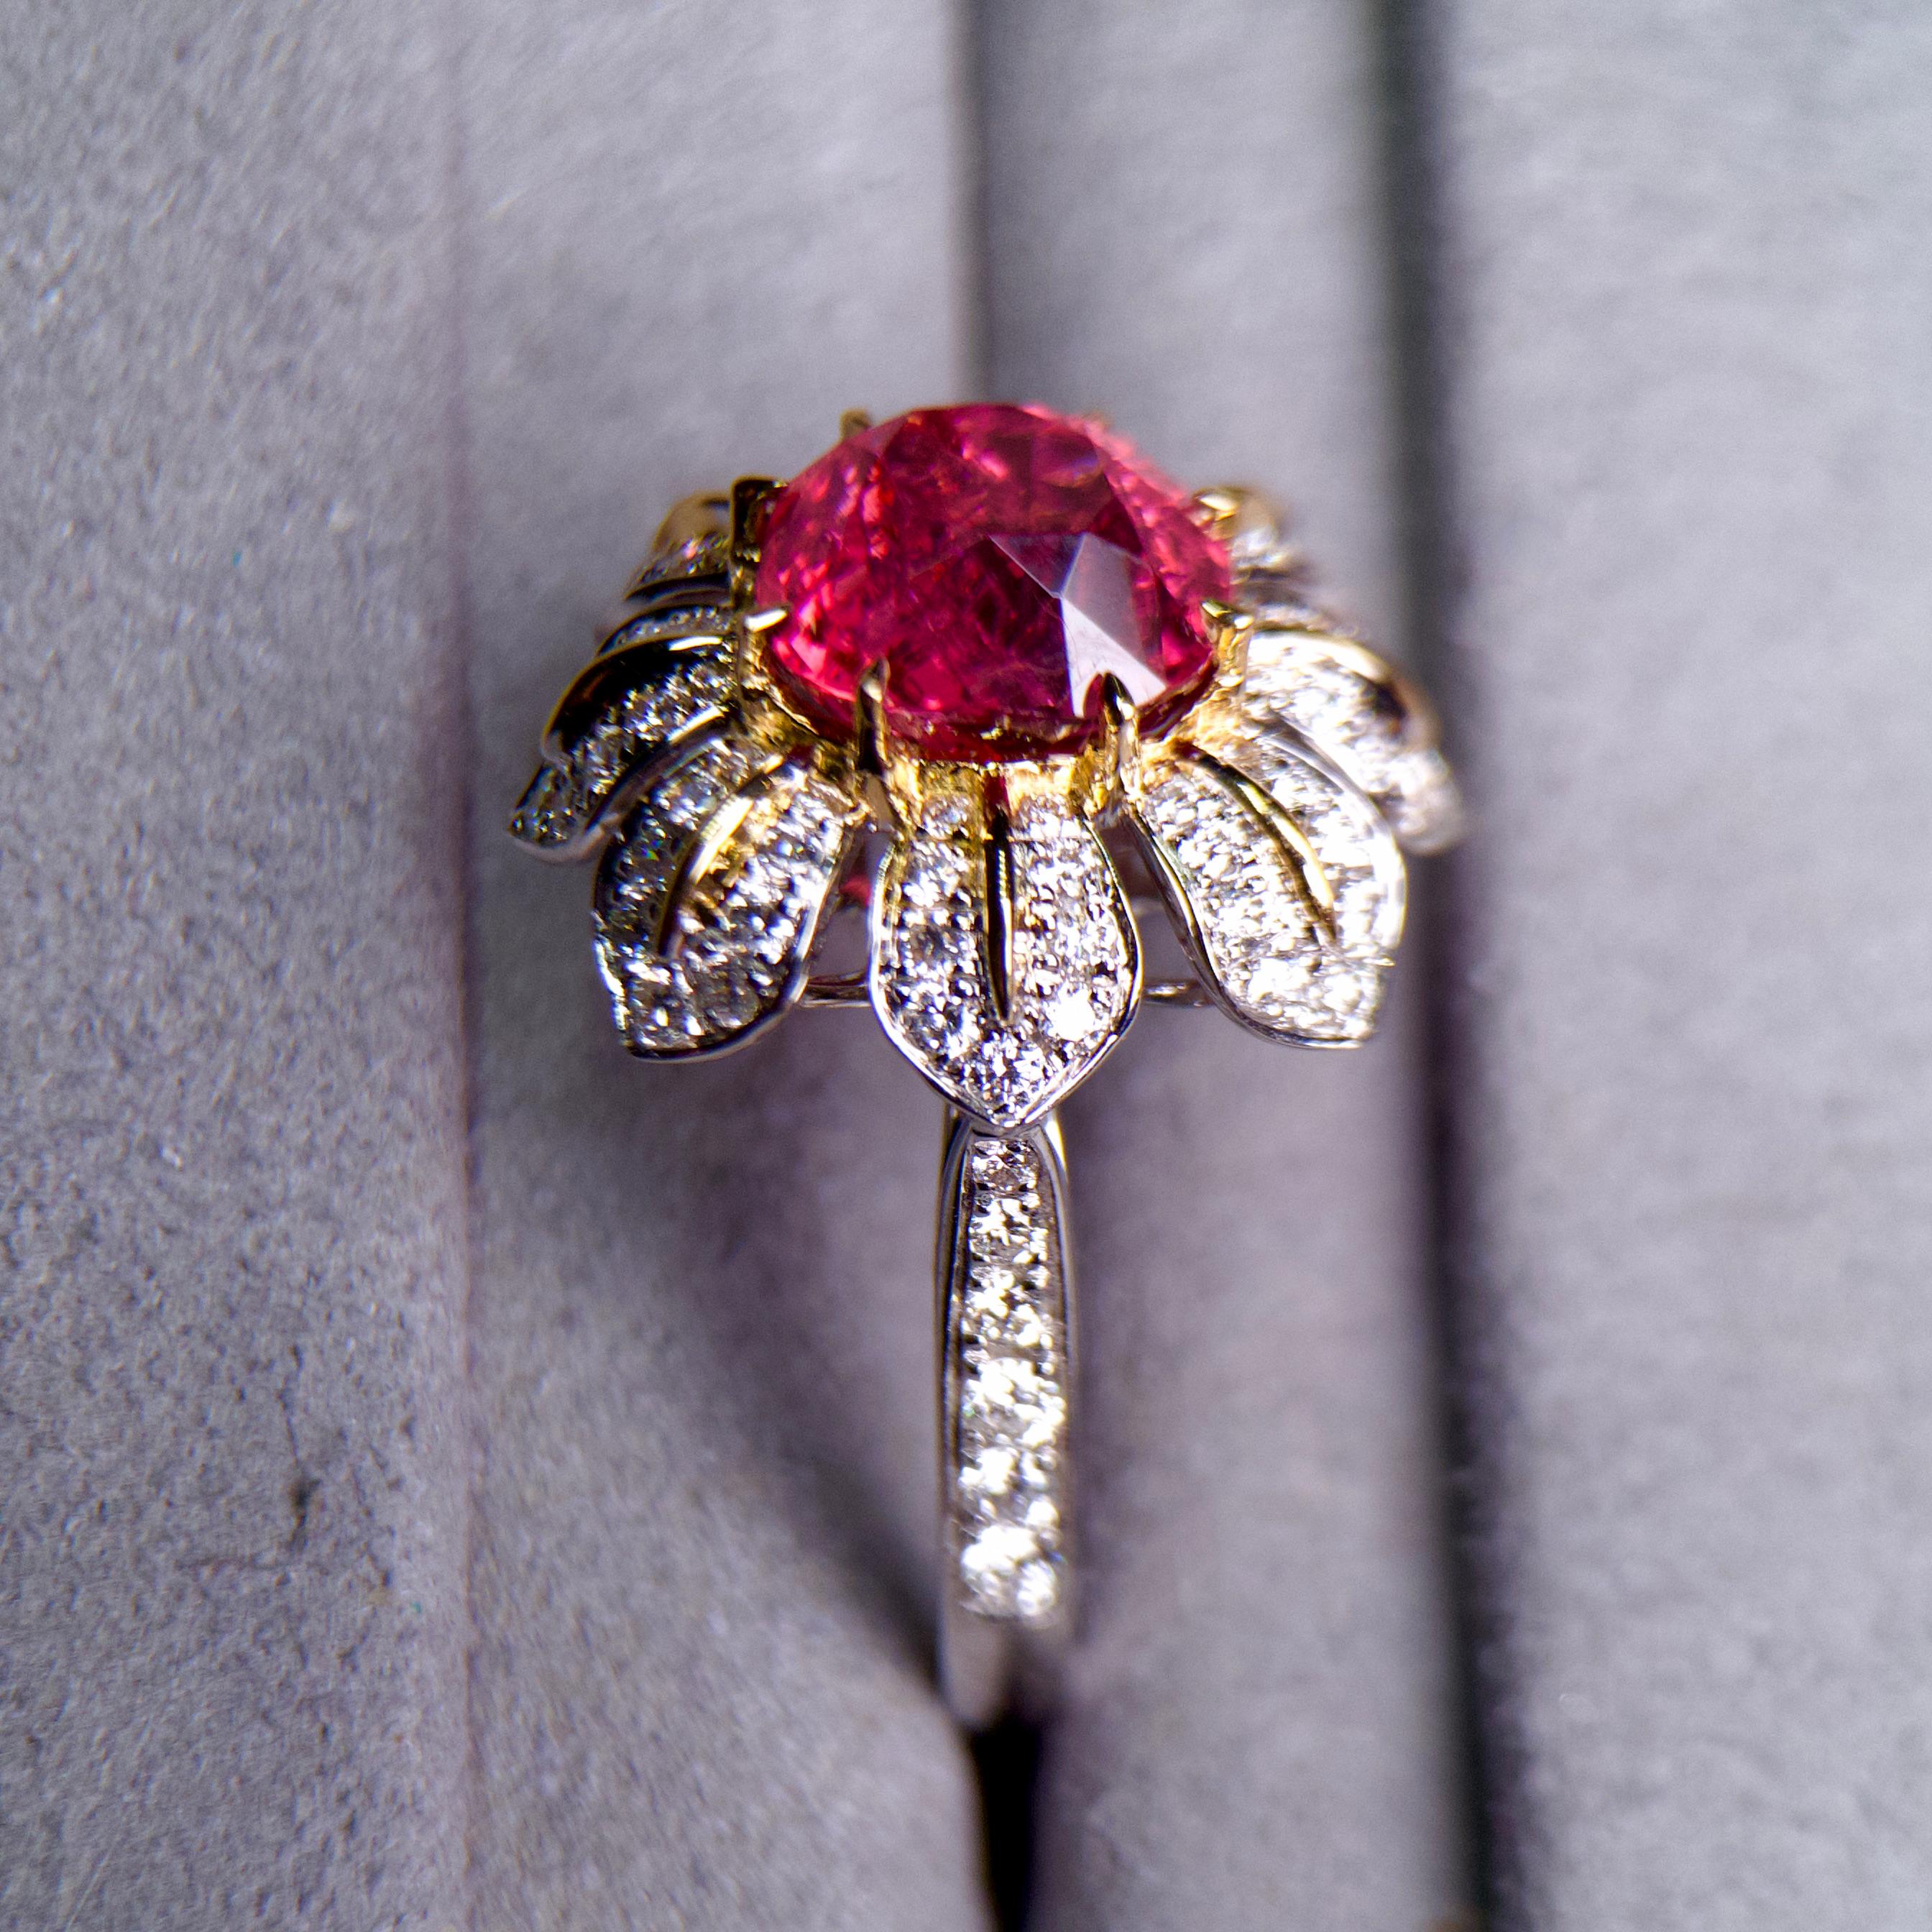 A 3.32ct Unheated Intense Red Color Spinel and Diamond Ring in 18k Gold 

Main Spinel Weight is 3.32ct, The color of the Spinel is Intense Red and in Known in the trade as “Jedi Spinel”. 

Total Natural Diamond Weight is 0.704ct, The Color of the